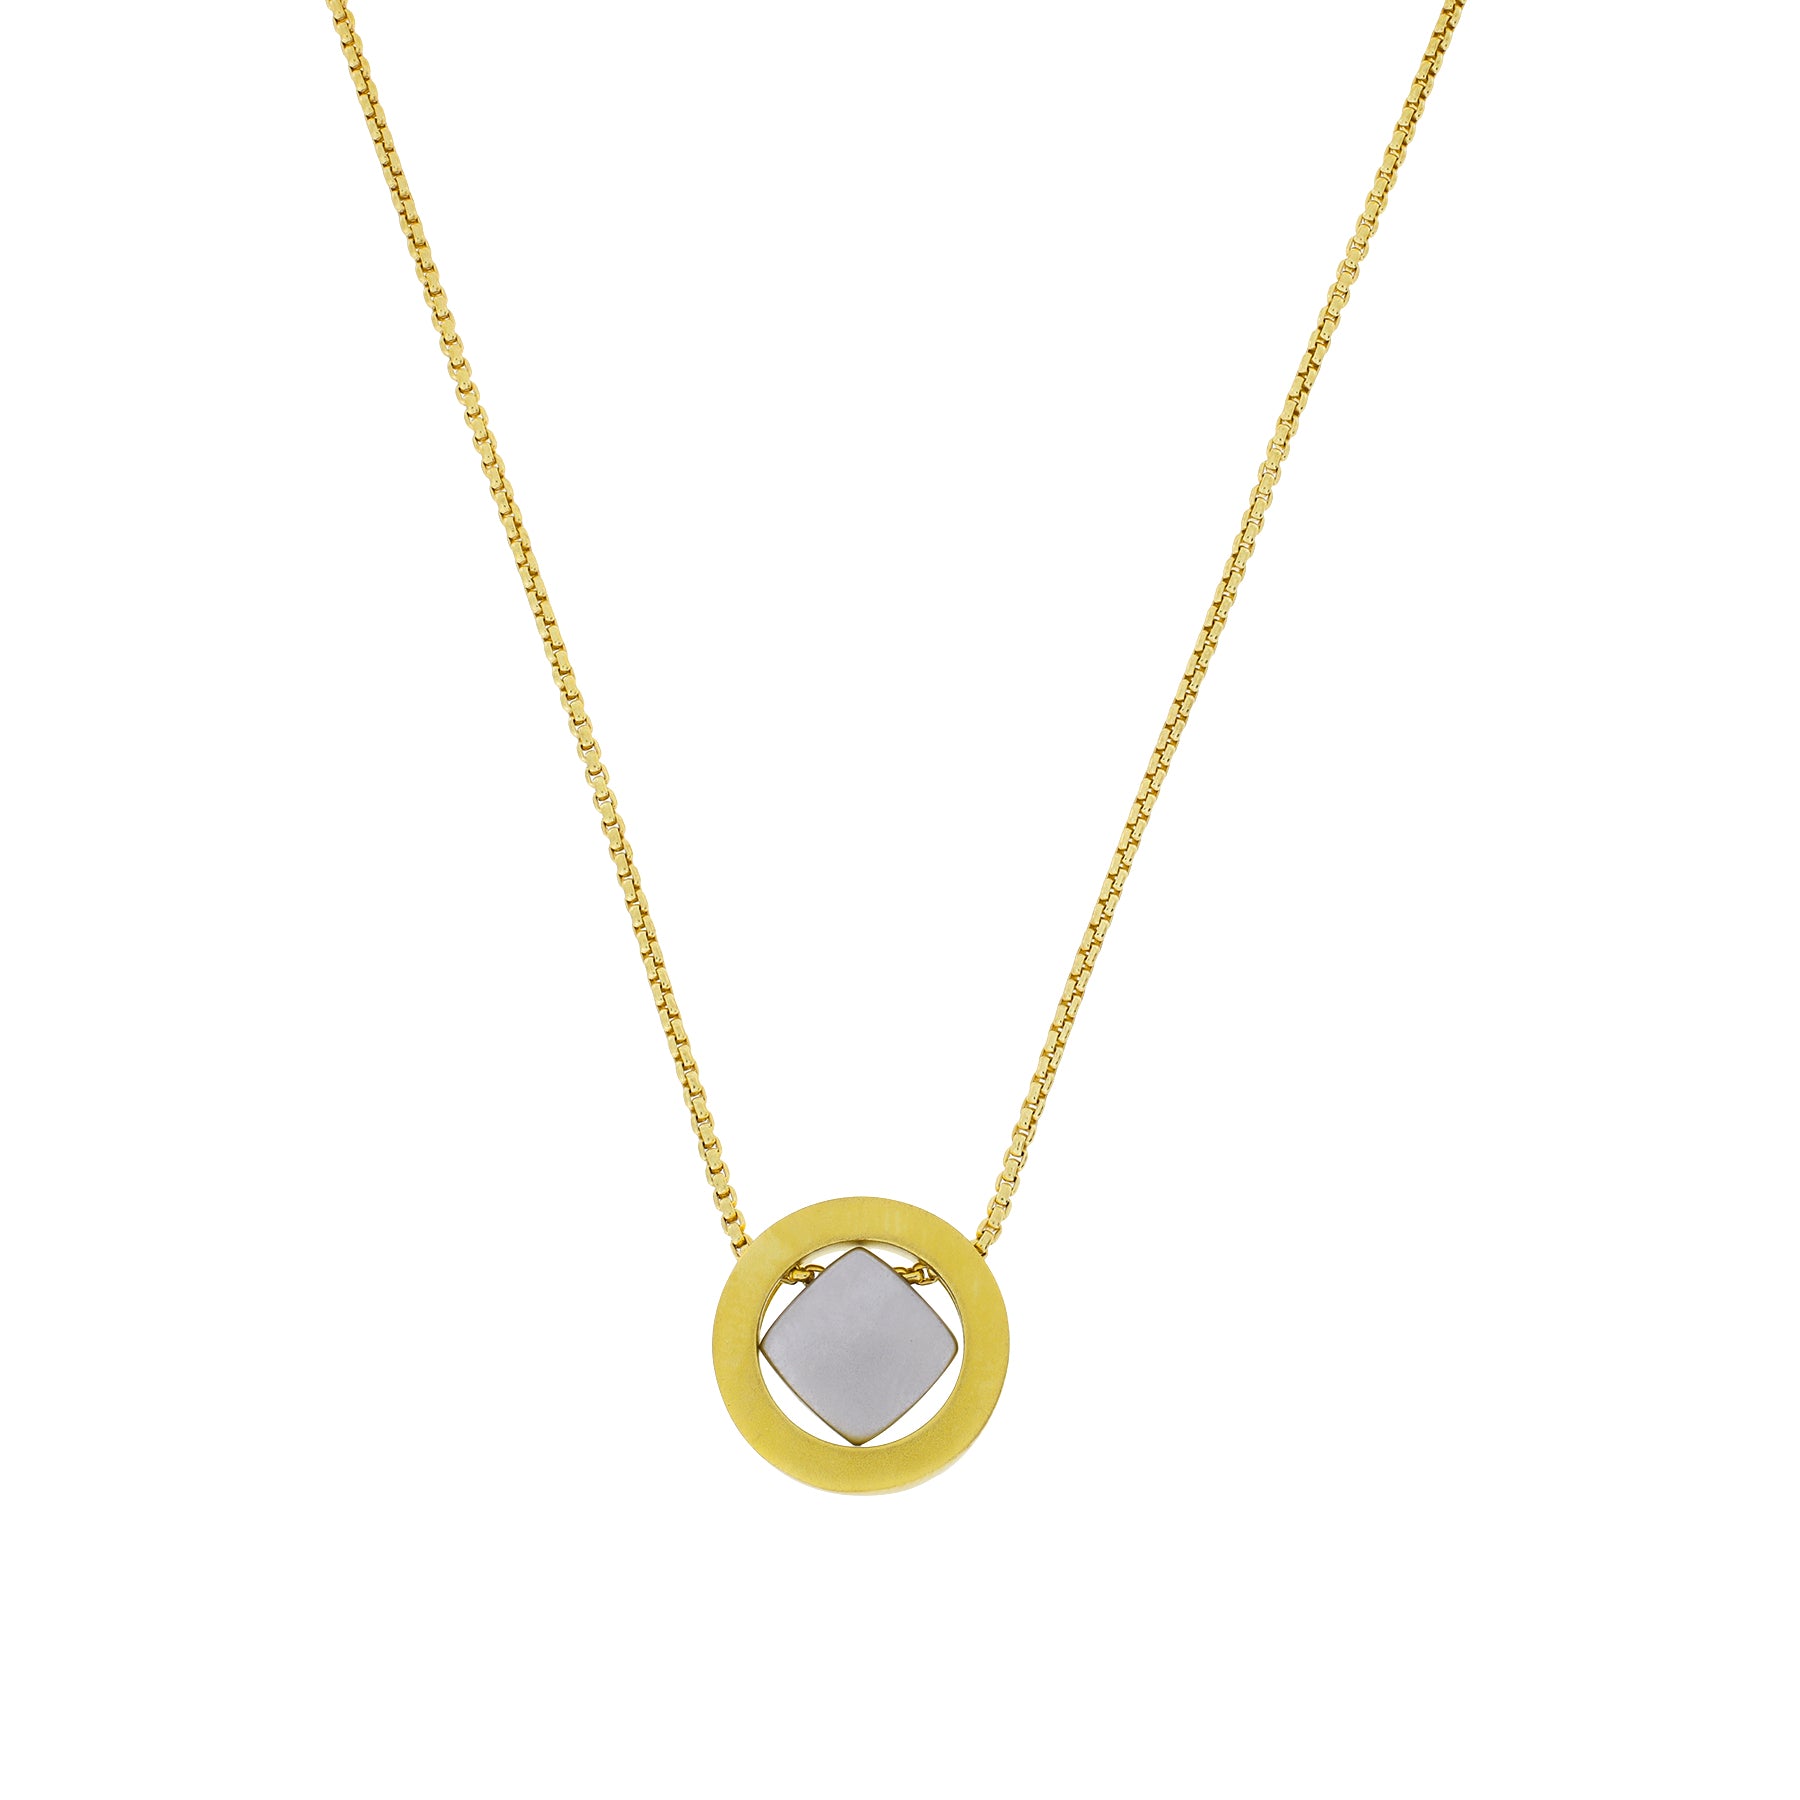 EMBRACE SILVER RHOMBUS & GOLD HALO NECKLACE